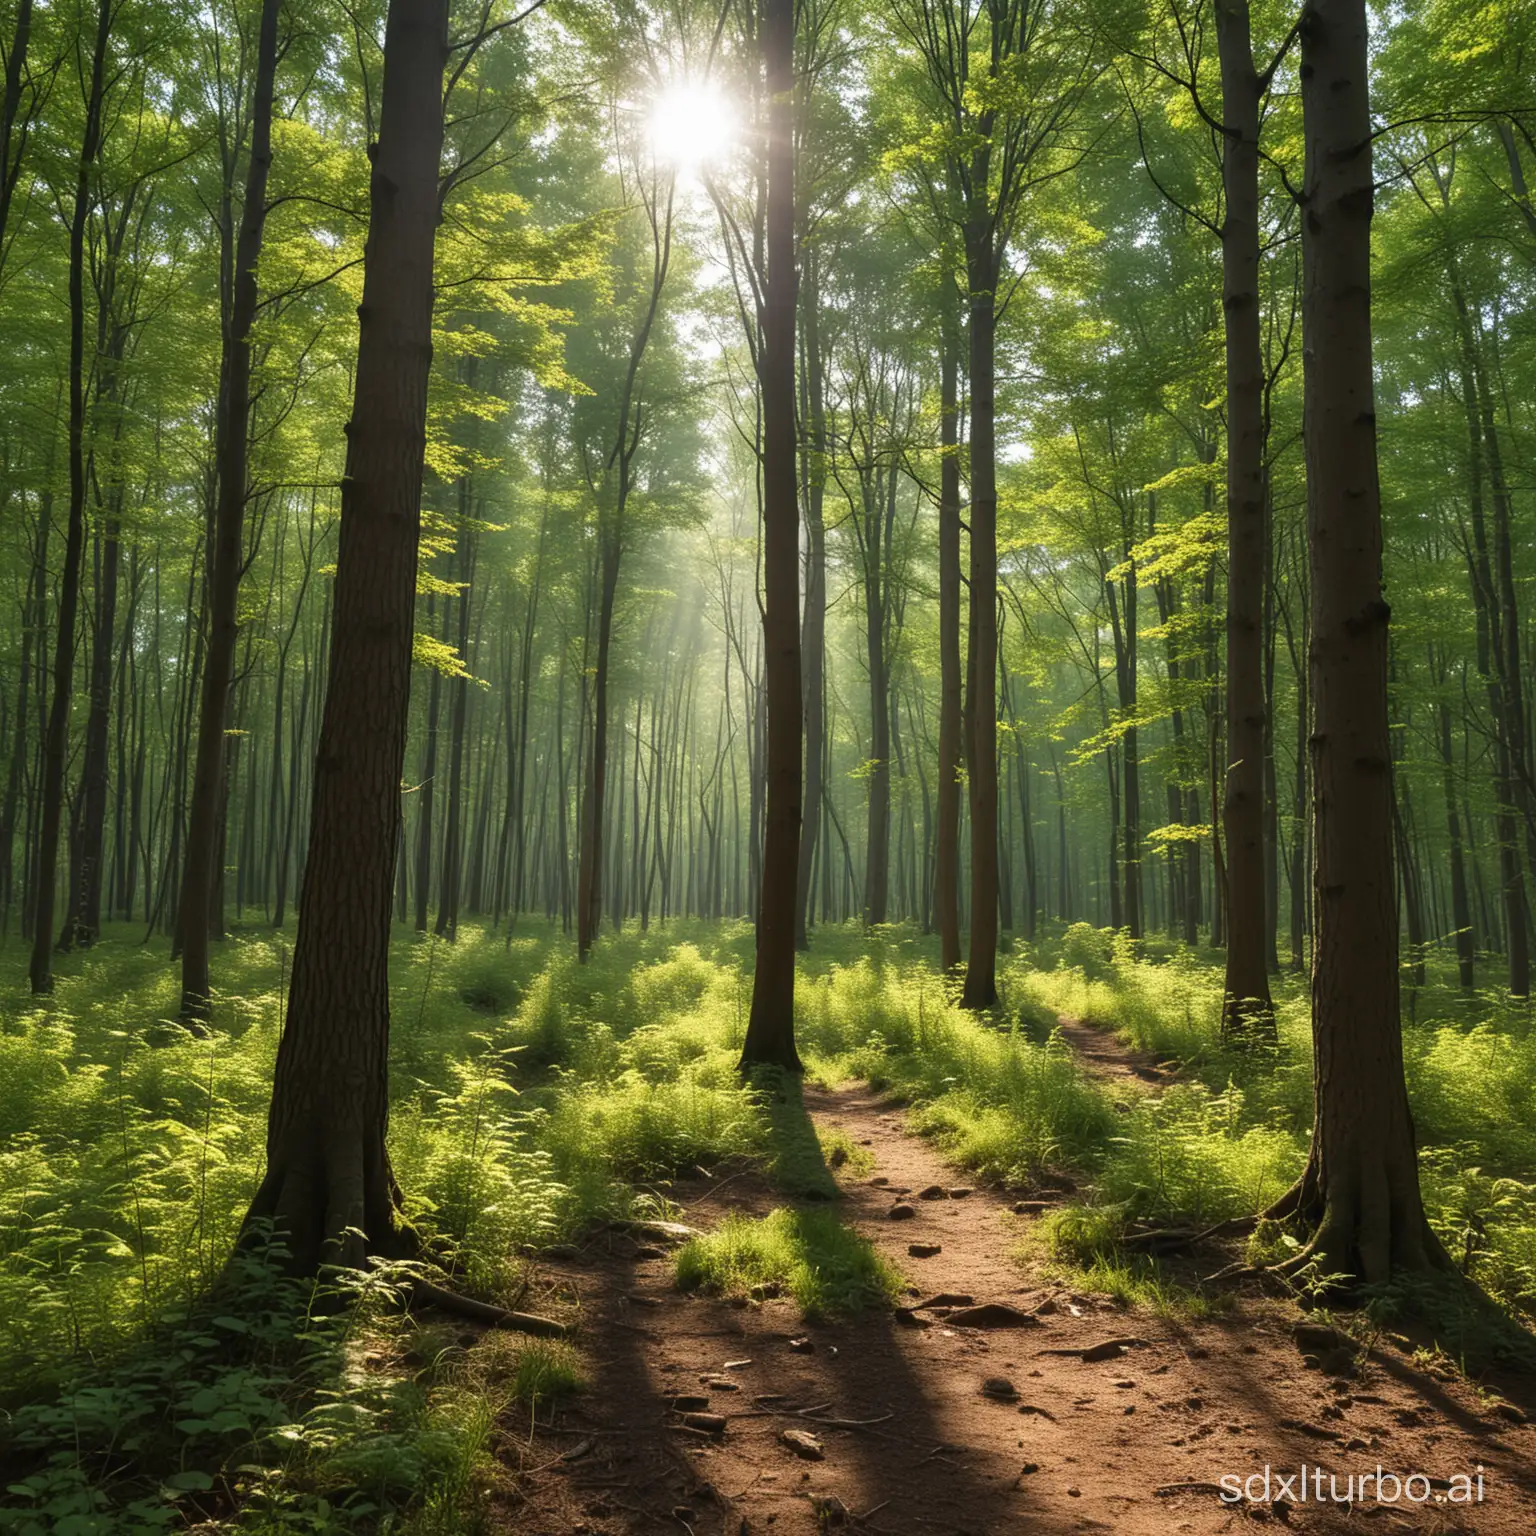 Tranquil-Summer-Forest-with-Sunlight-Filtering-Through